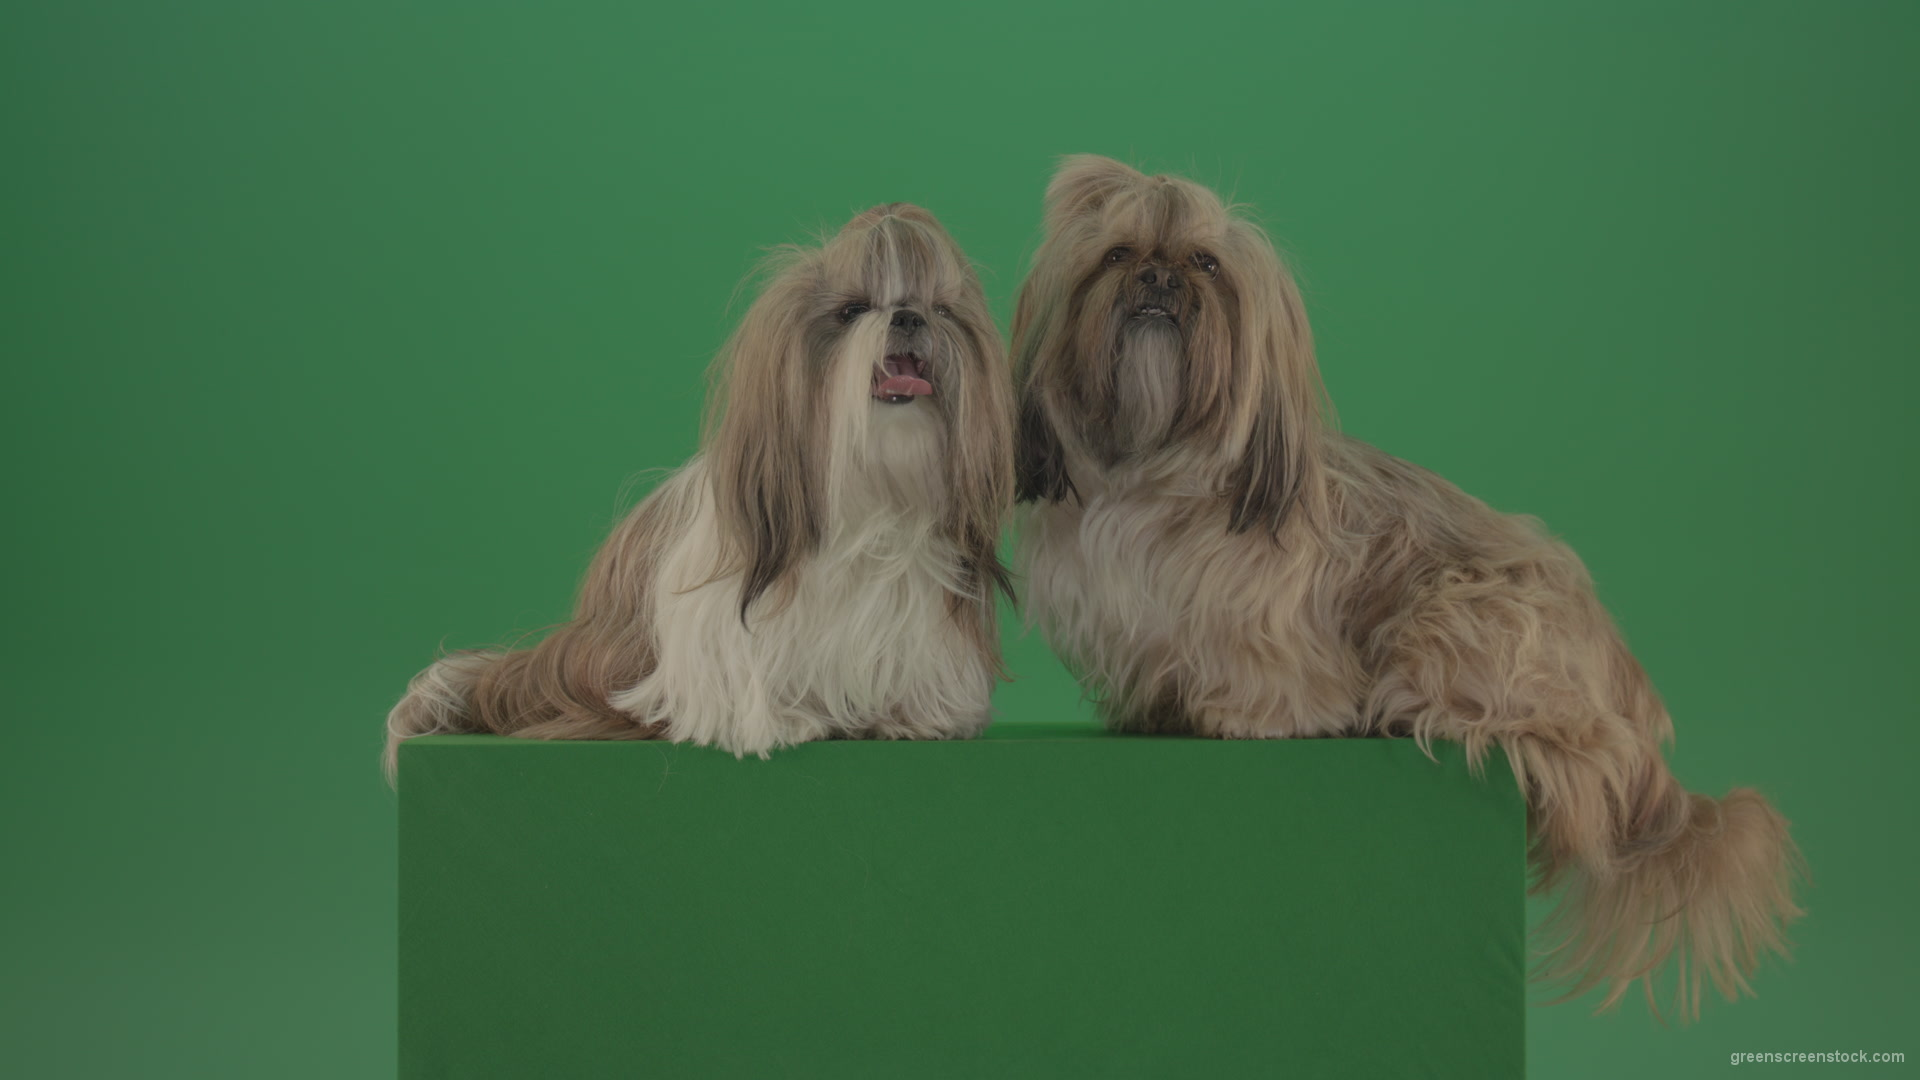 Two-cute-Shih-Tzu-Small-toy-dogs-yawling-and-sitting-on-green-screen-4K_004 Green Screen Stock